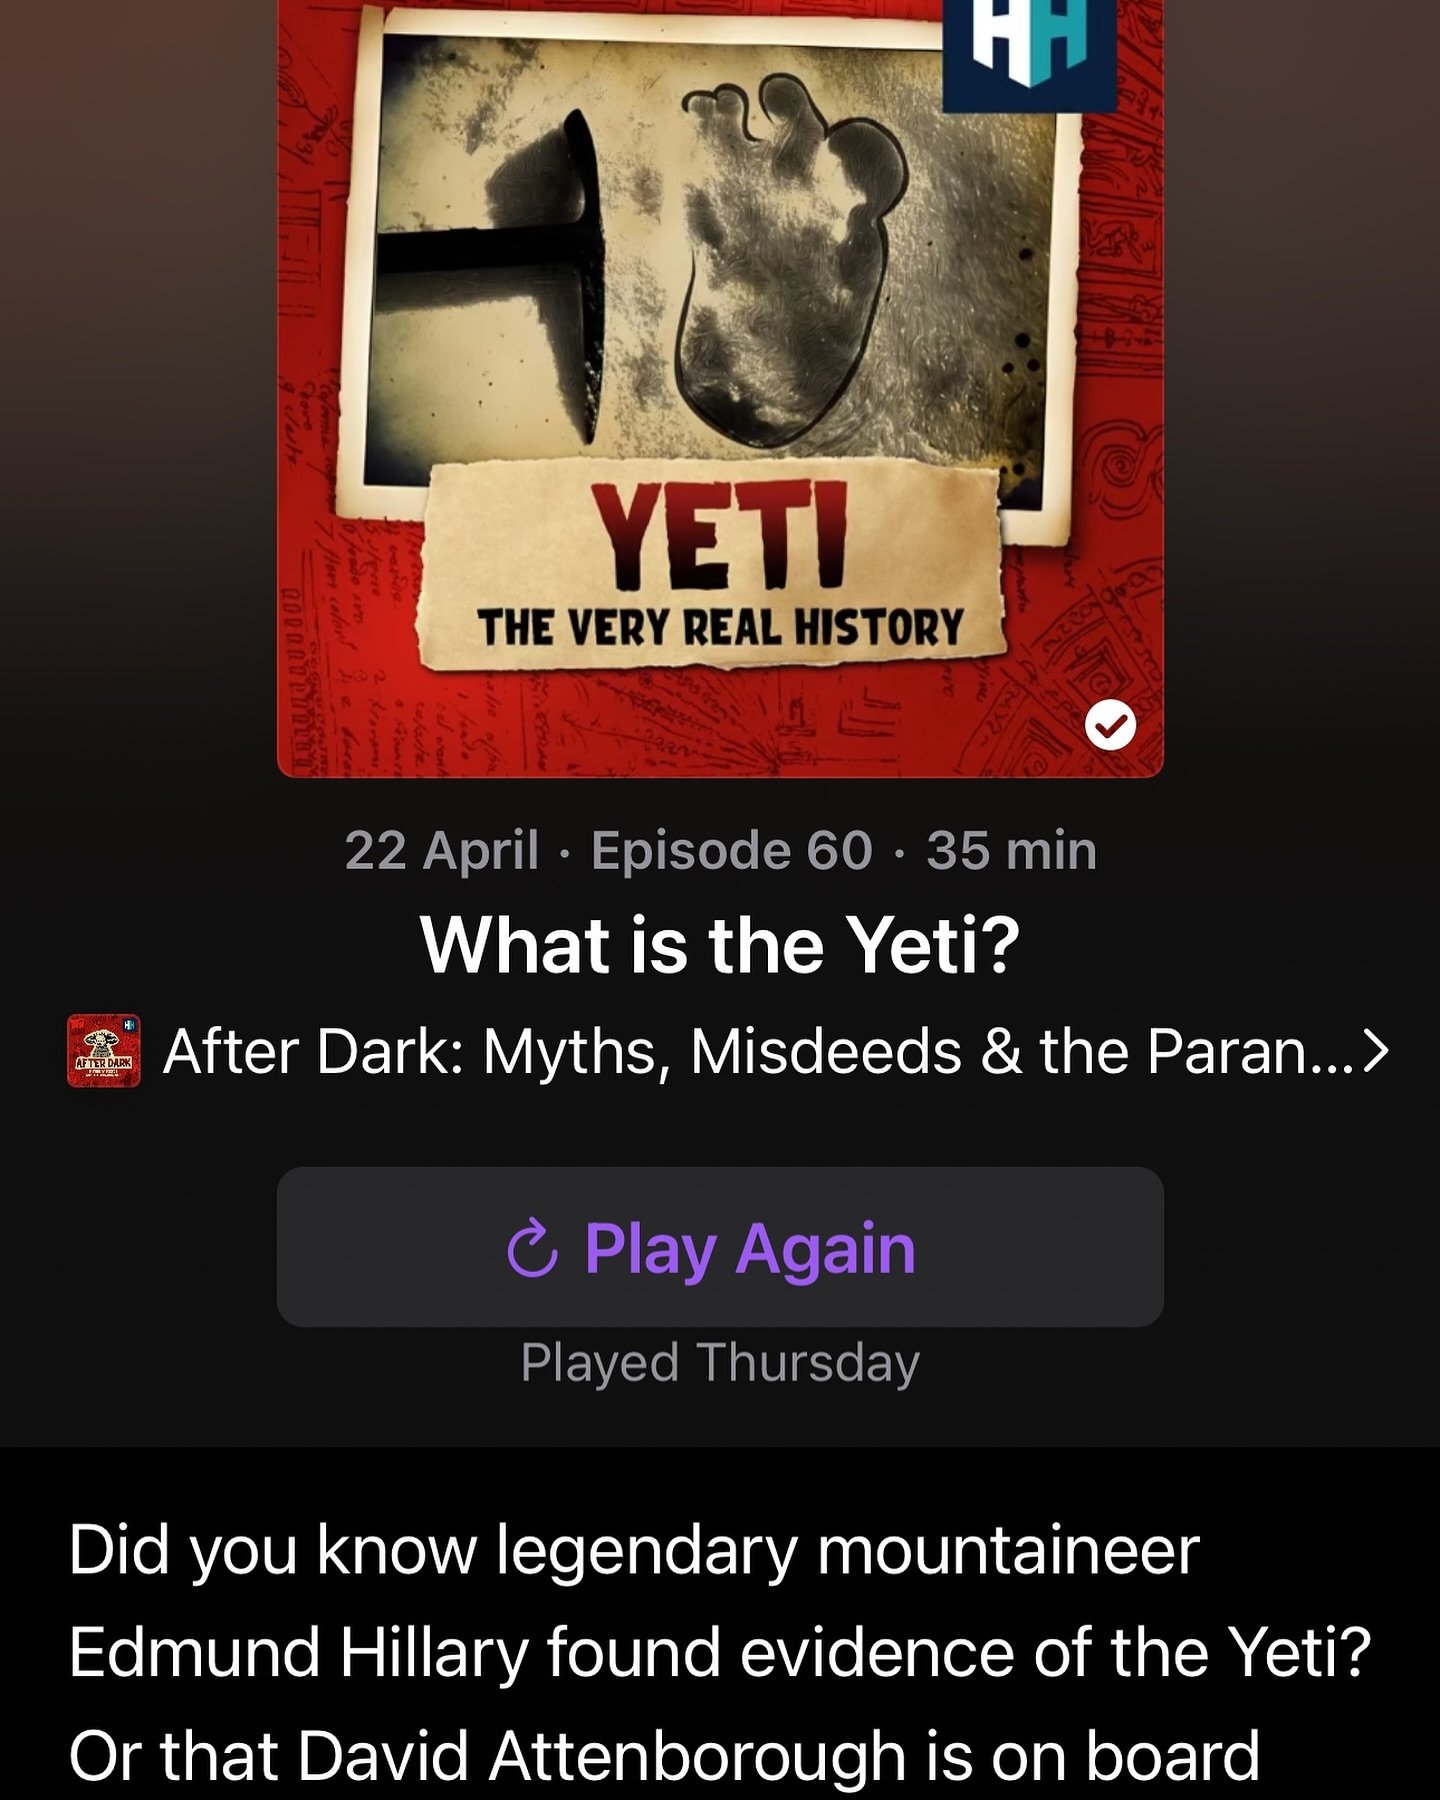 A lovely new Yeti-themed podcast episode just out from Dan Snow&rsquo;s fantastic History Hit!

It has however generously promoted Richard and myself to &ldquo;western mountaineers&rdquo;, in spite of the fact that I&rsquo;ve never donned a pair of c